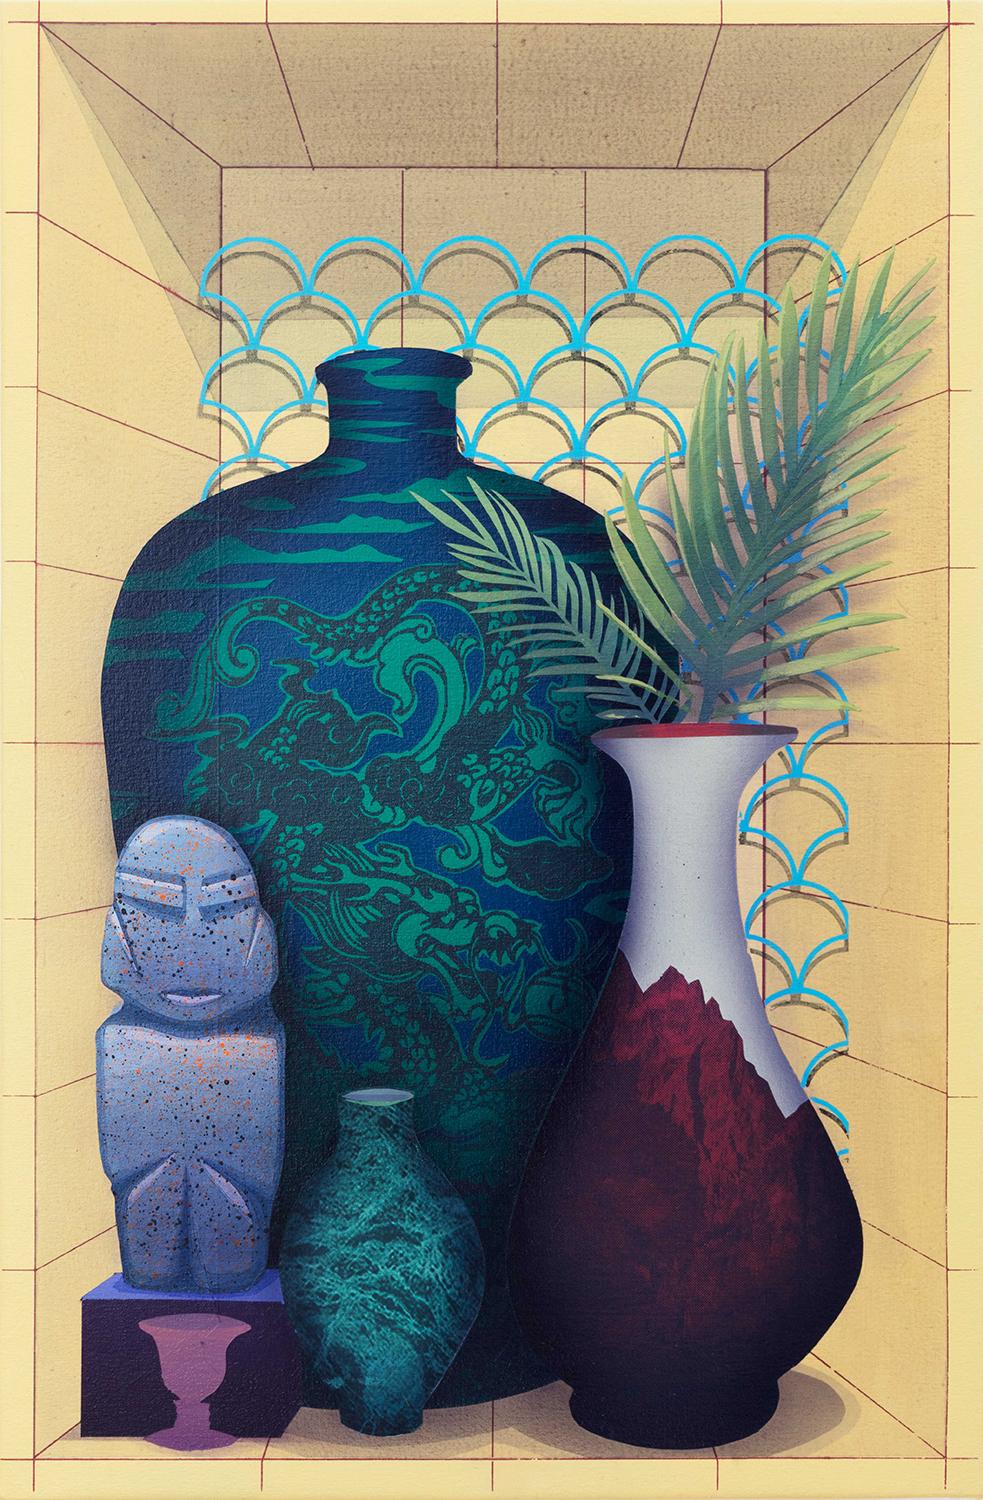 The Excluded (2 Vases)  - Painting by Robert Minervini